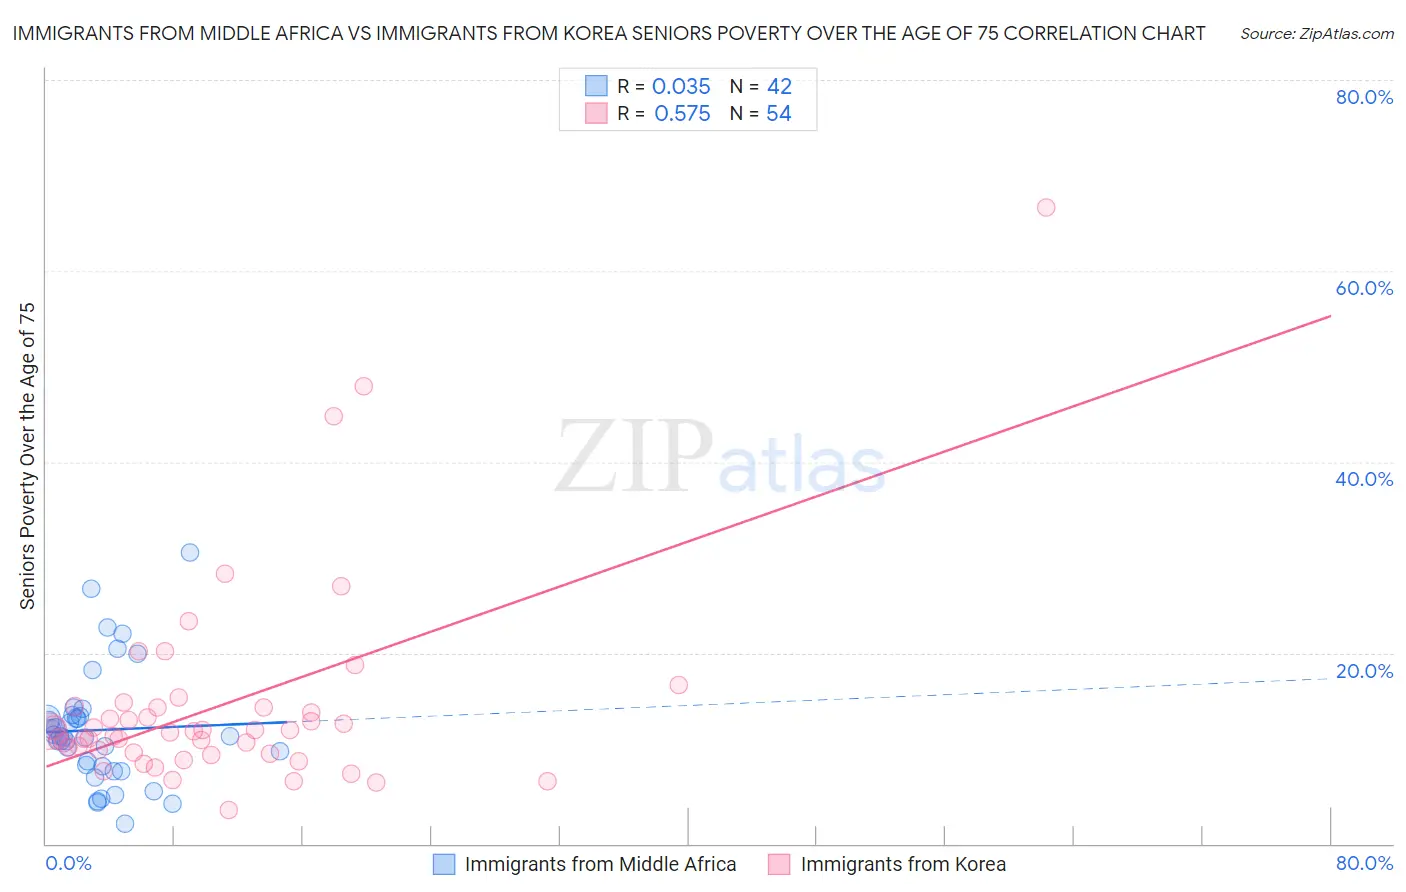 Immigrants from Middle Africa vs Immigrants from Korea Seniors Poverty Over the Age of 75